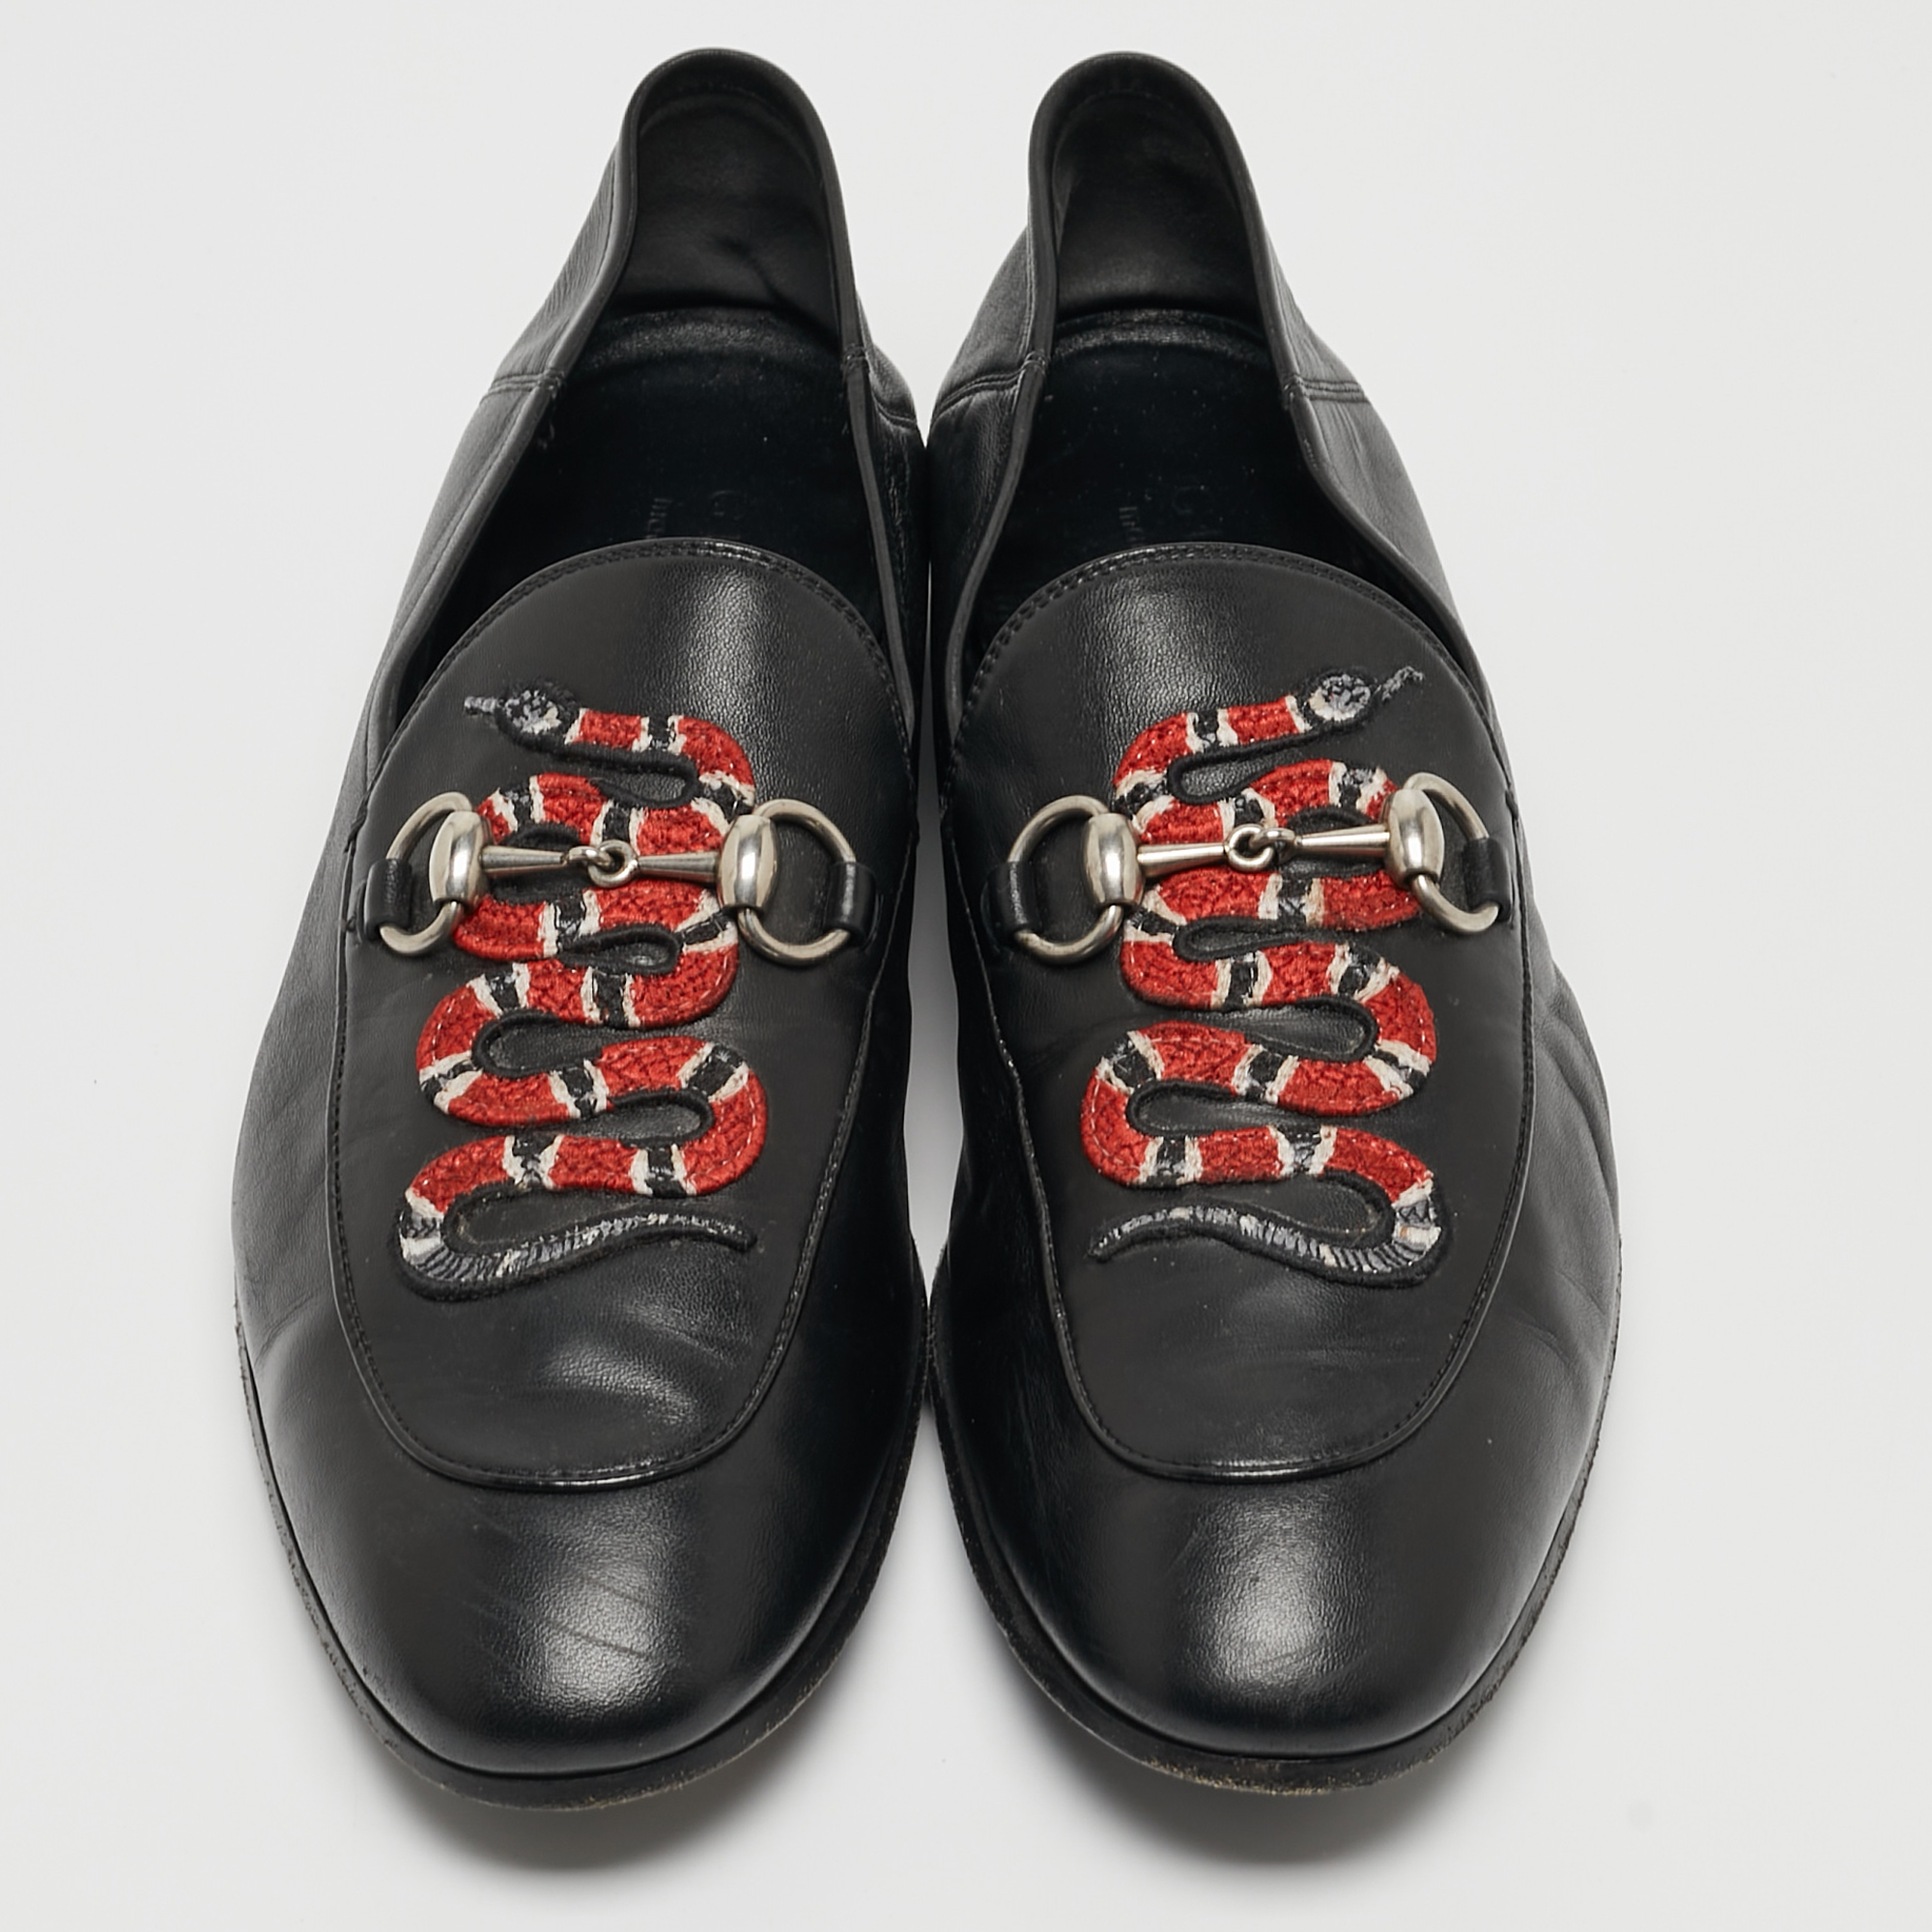 Gucci Black Leather Embroidered Kingsnake Brixton Horsebit Loafers Size 43